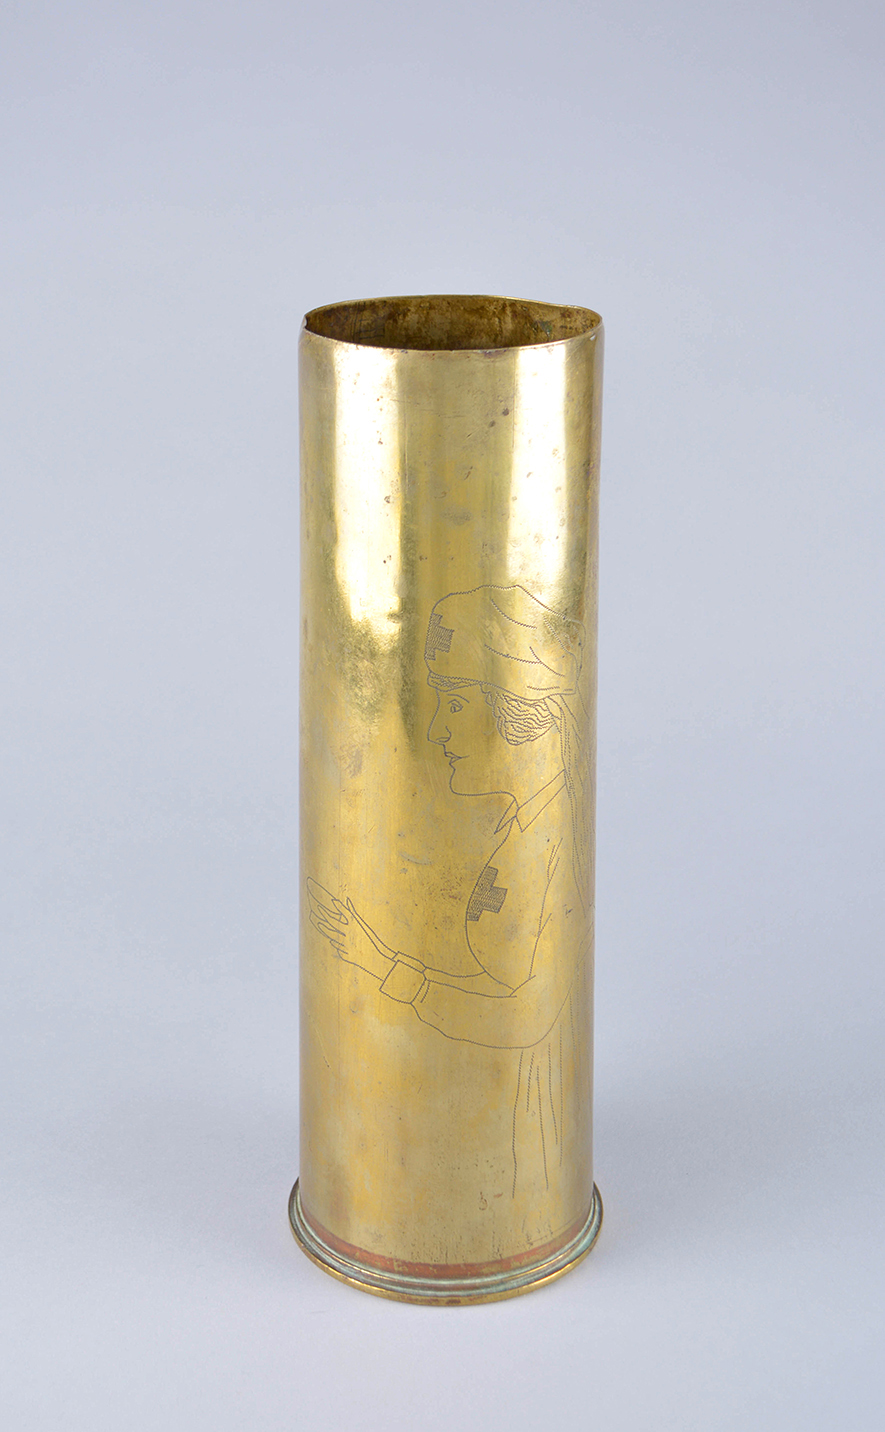 A vase made from a polished brass shell casing engraved with a detailed image of a nurse in full uniform.